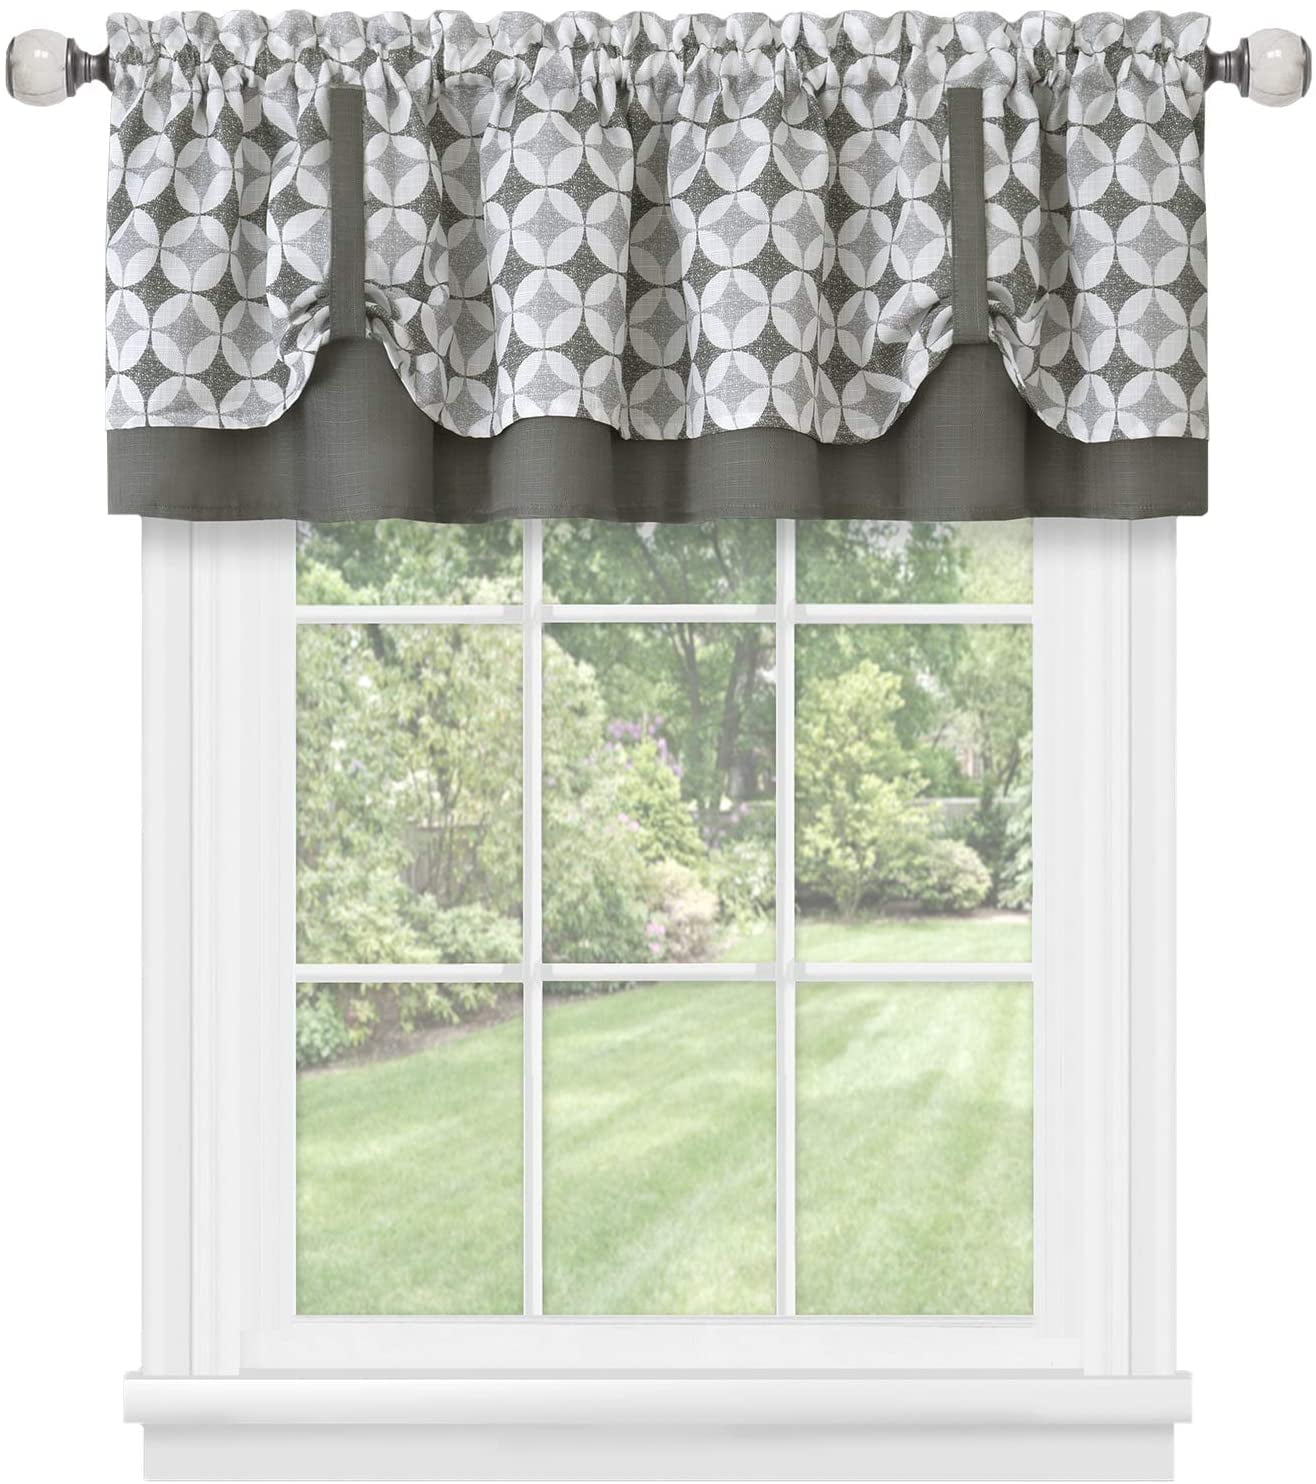 RED WAVERLY COUNTRY LIFE TOILE  LAYERD SCALLOP COVERED BUTTONS Valance Curtains 